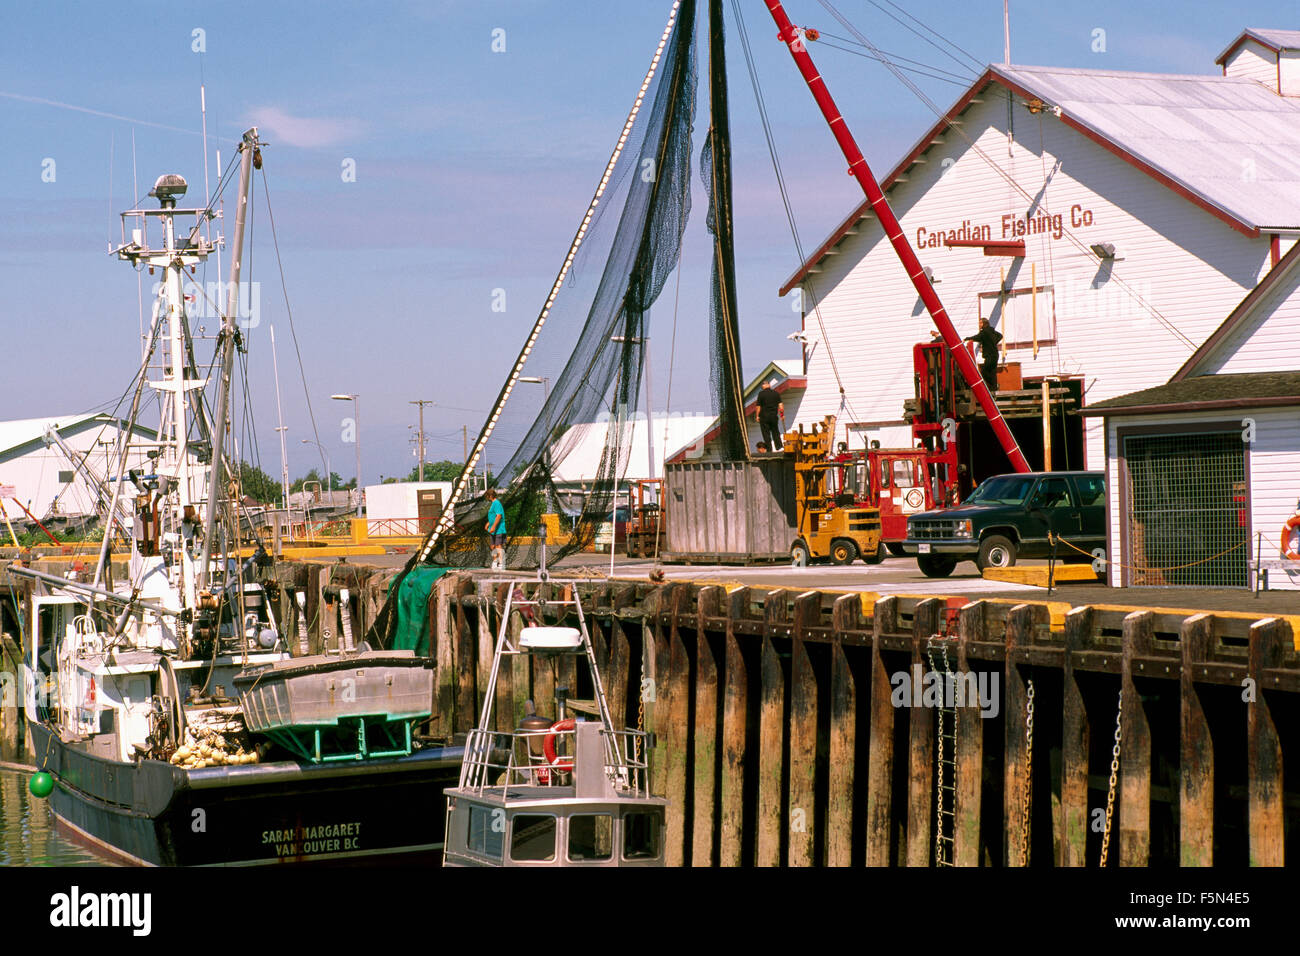 Commercial Fishing Boat / Seiner docked in Fraser River Boat Harbour, Steveston, BC, British Columbia, Canada Stock Photo